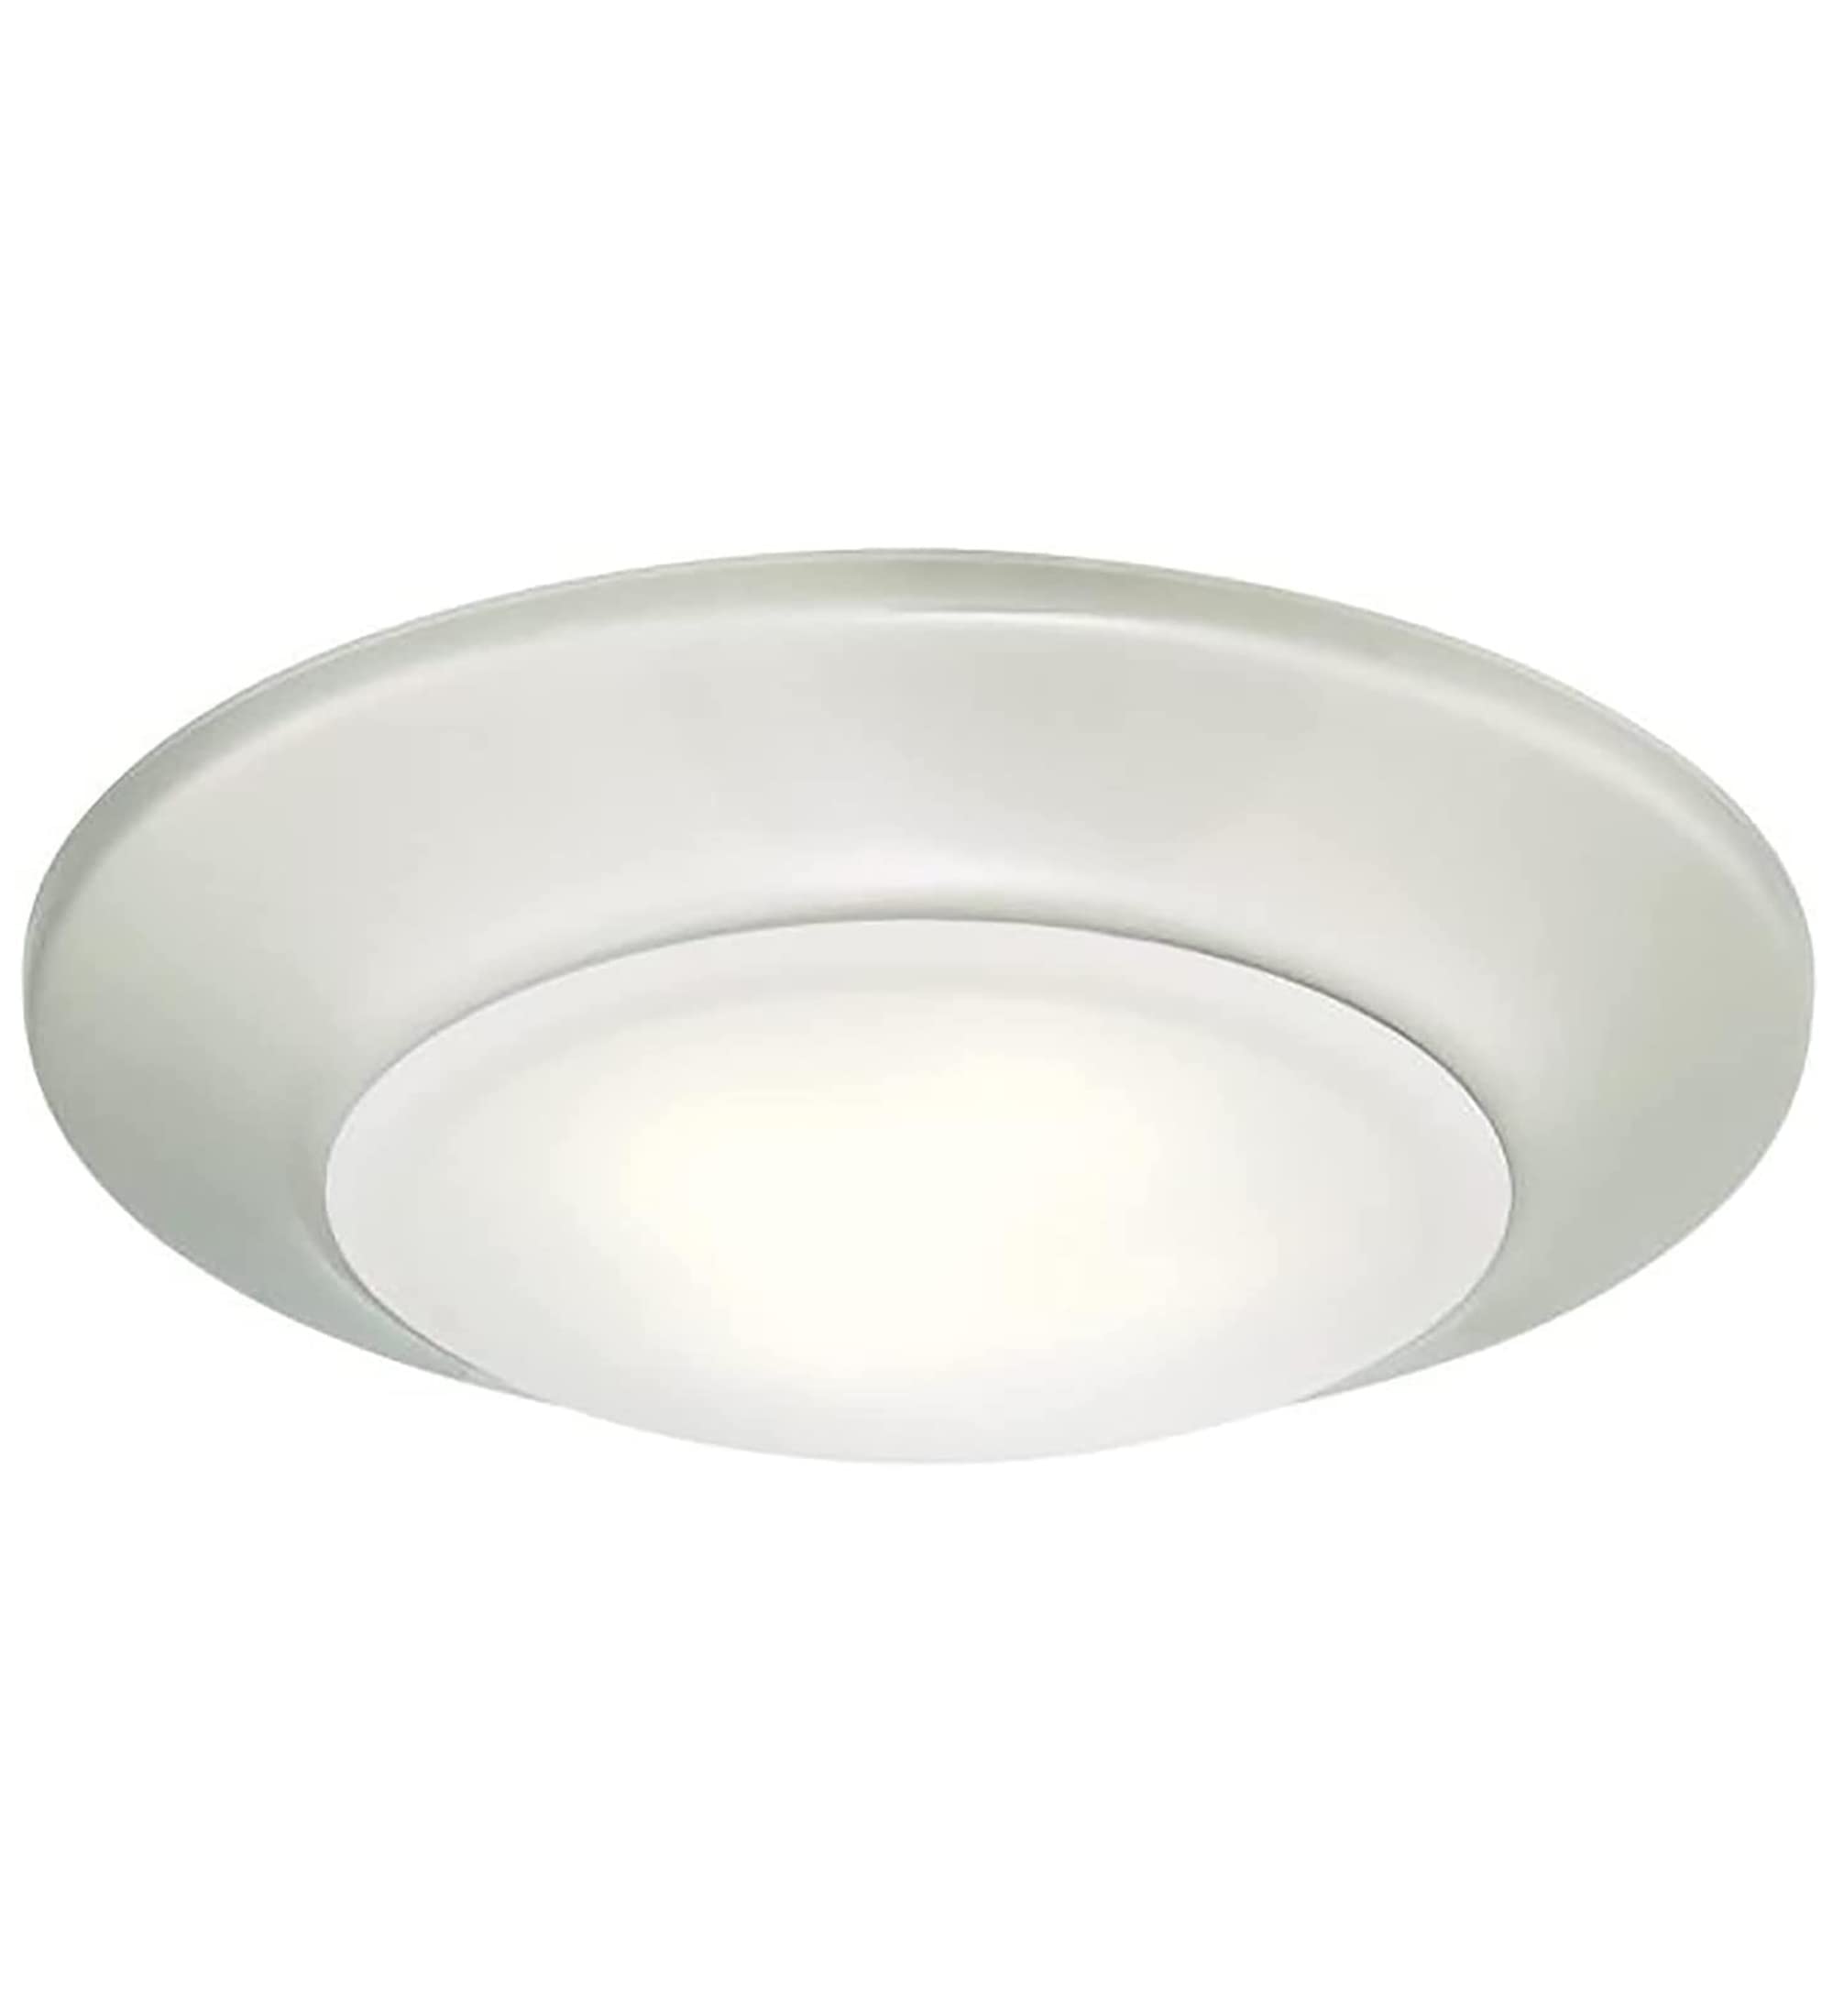 Ciata Lighting Dimmable Indoor/Outdoor LED Surface Mount for Wet Location with Frosted Lens  - Like New